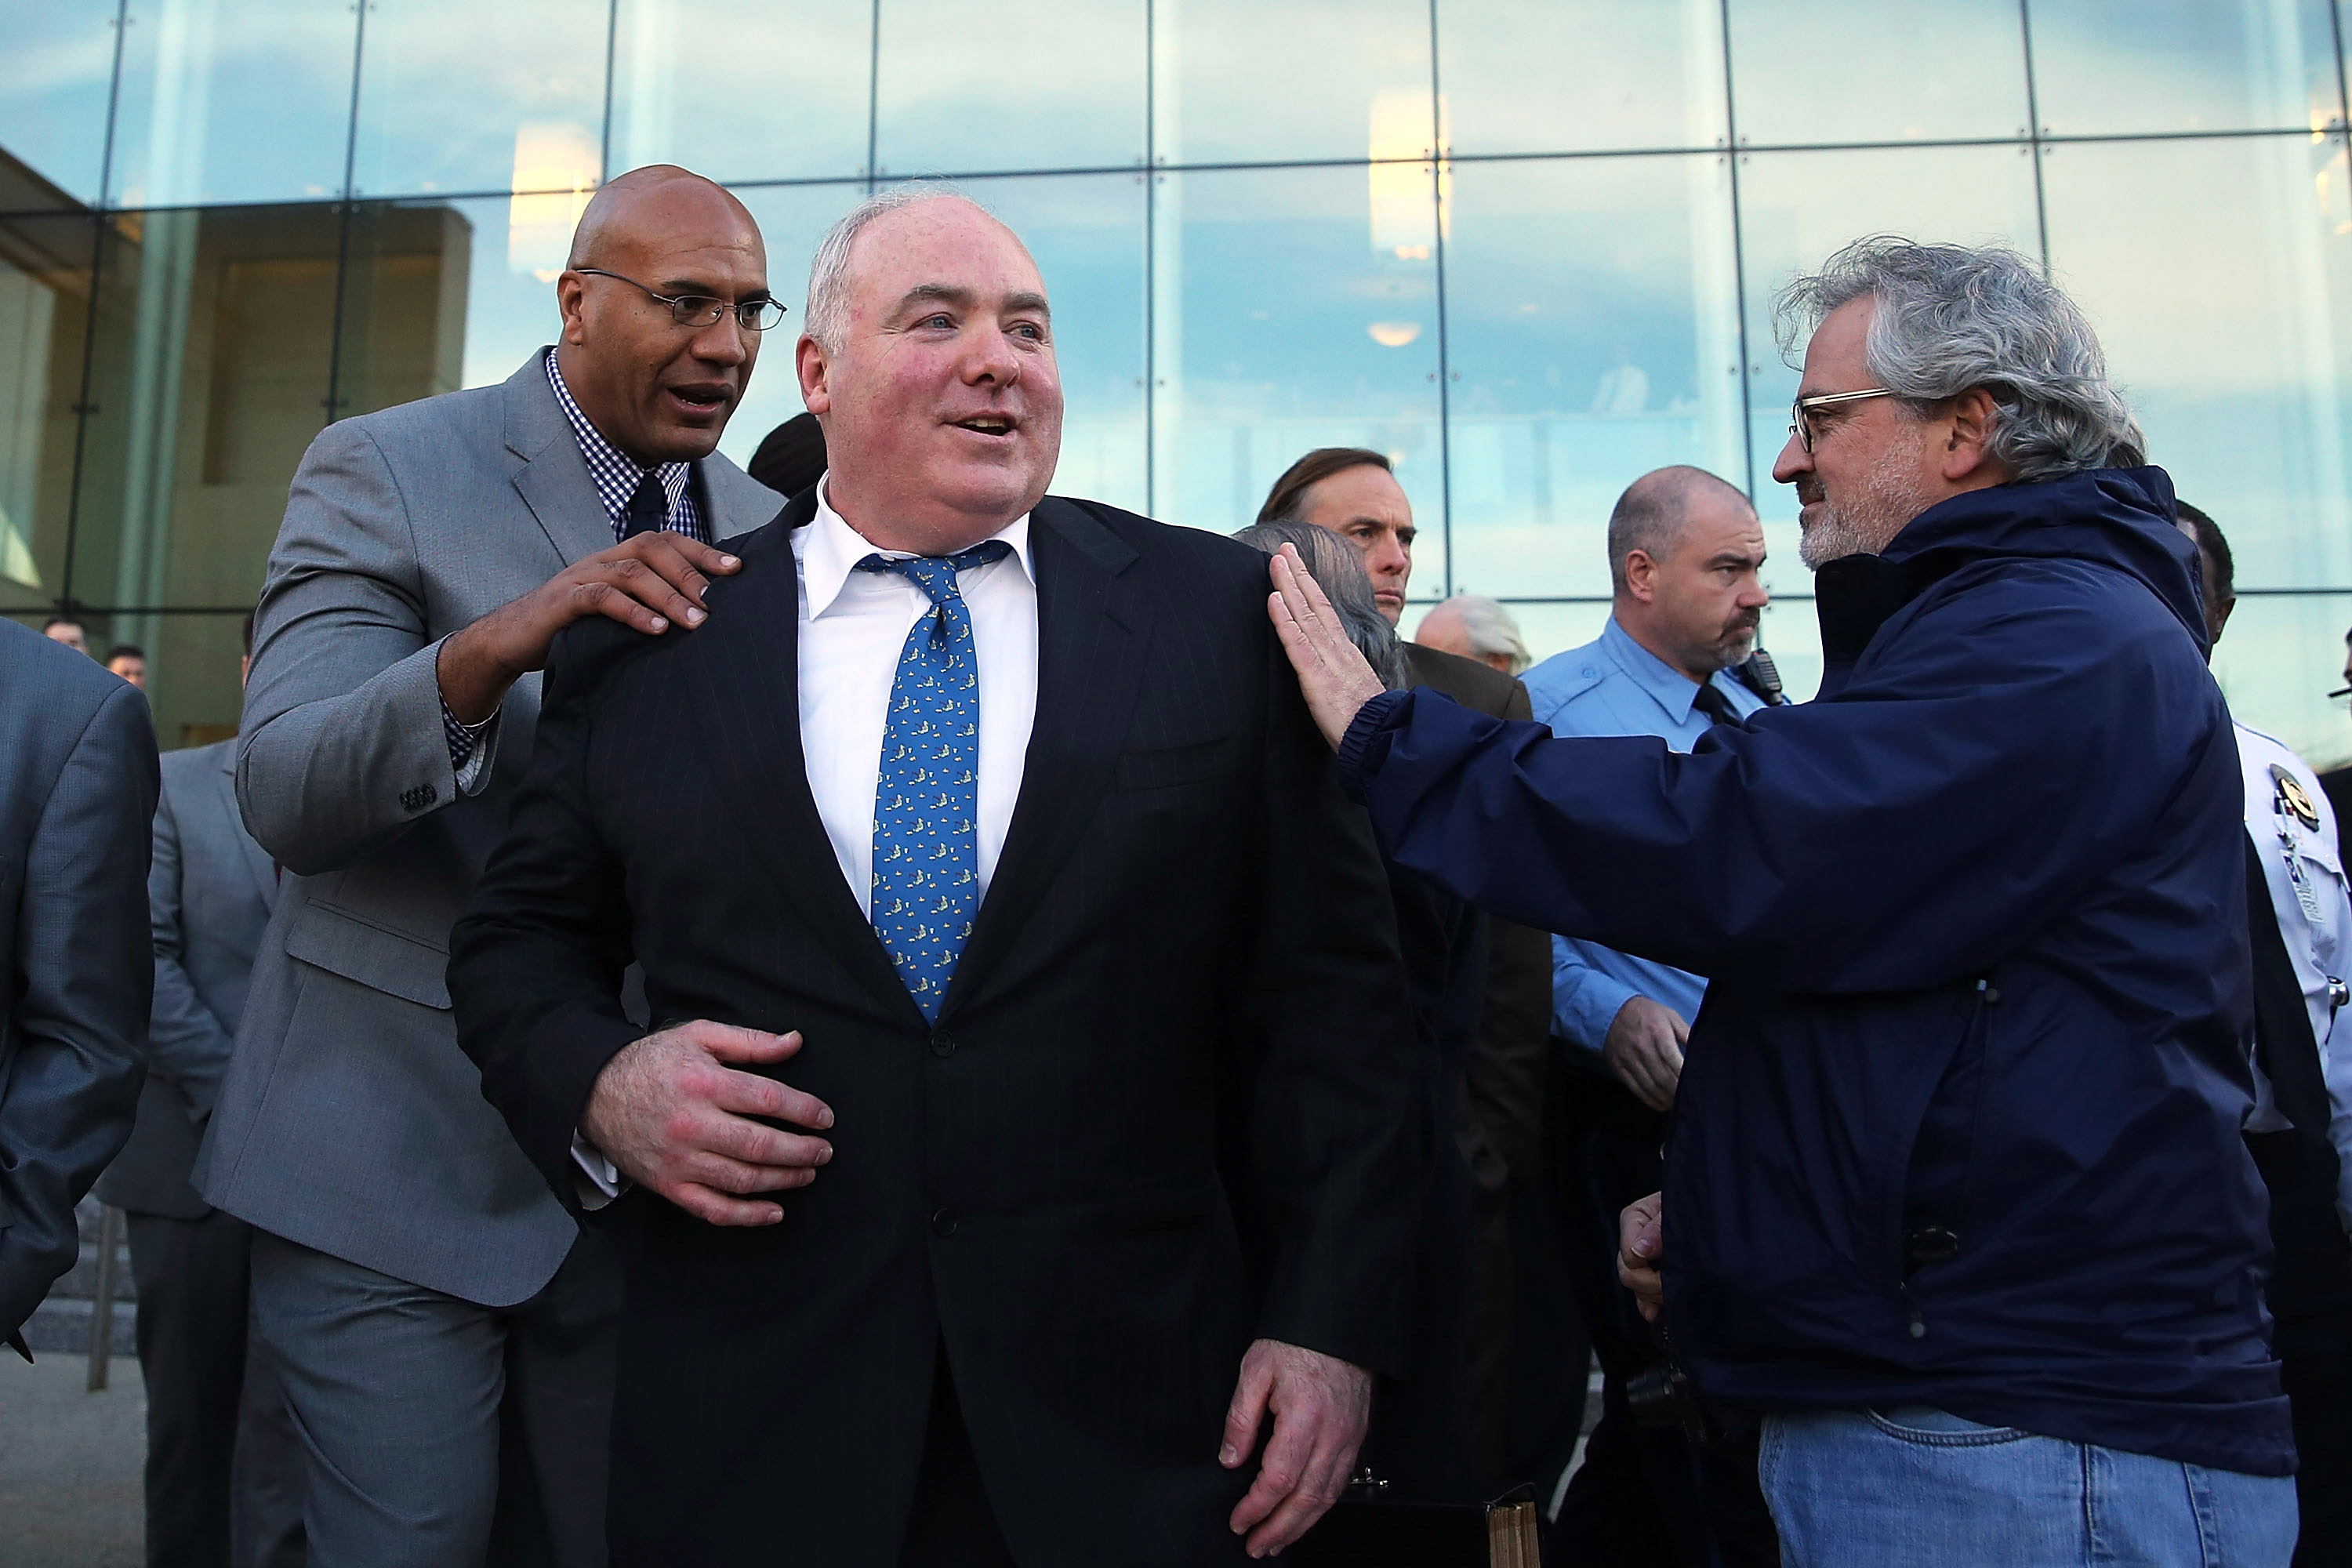 Michael Skakel 5 Fast Facts You Need to Know